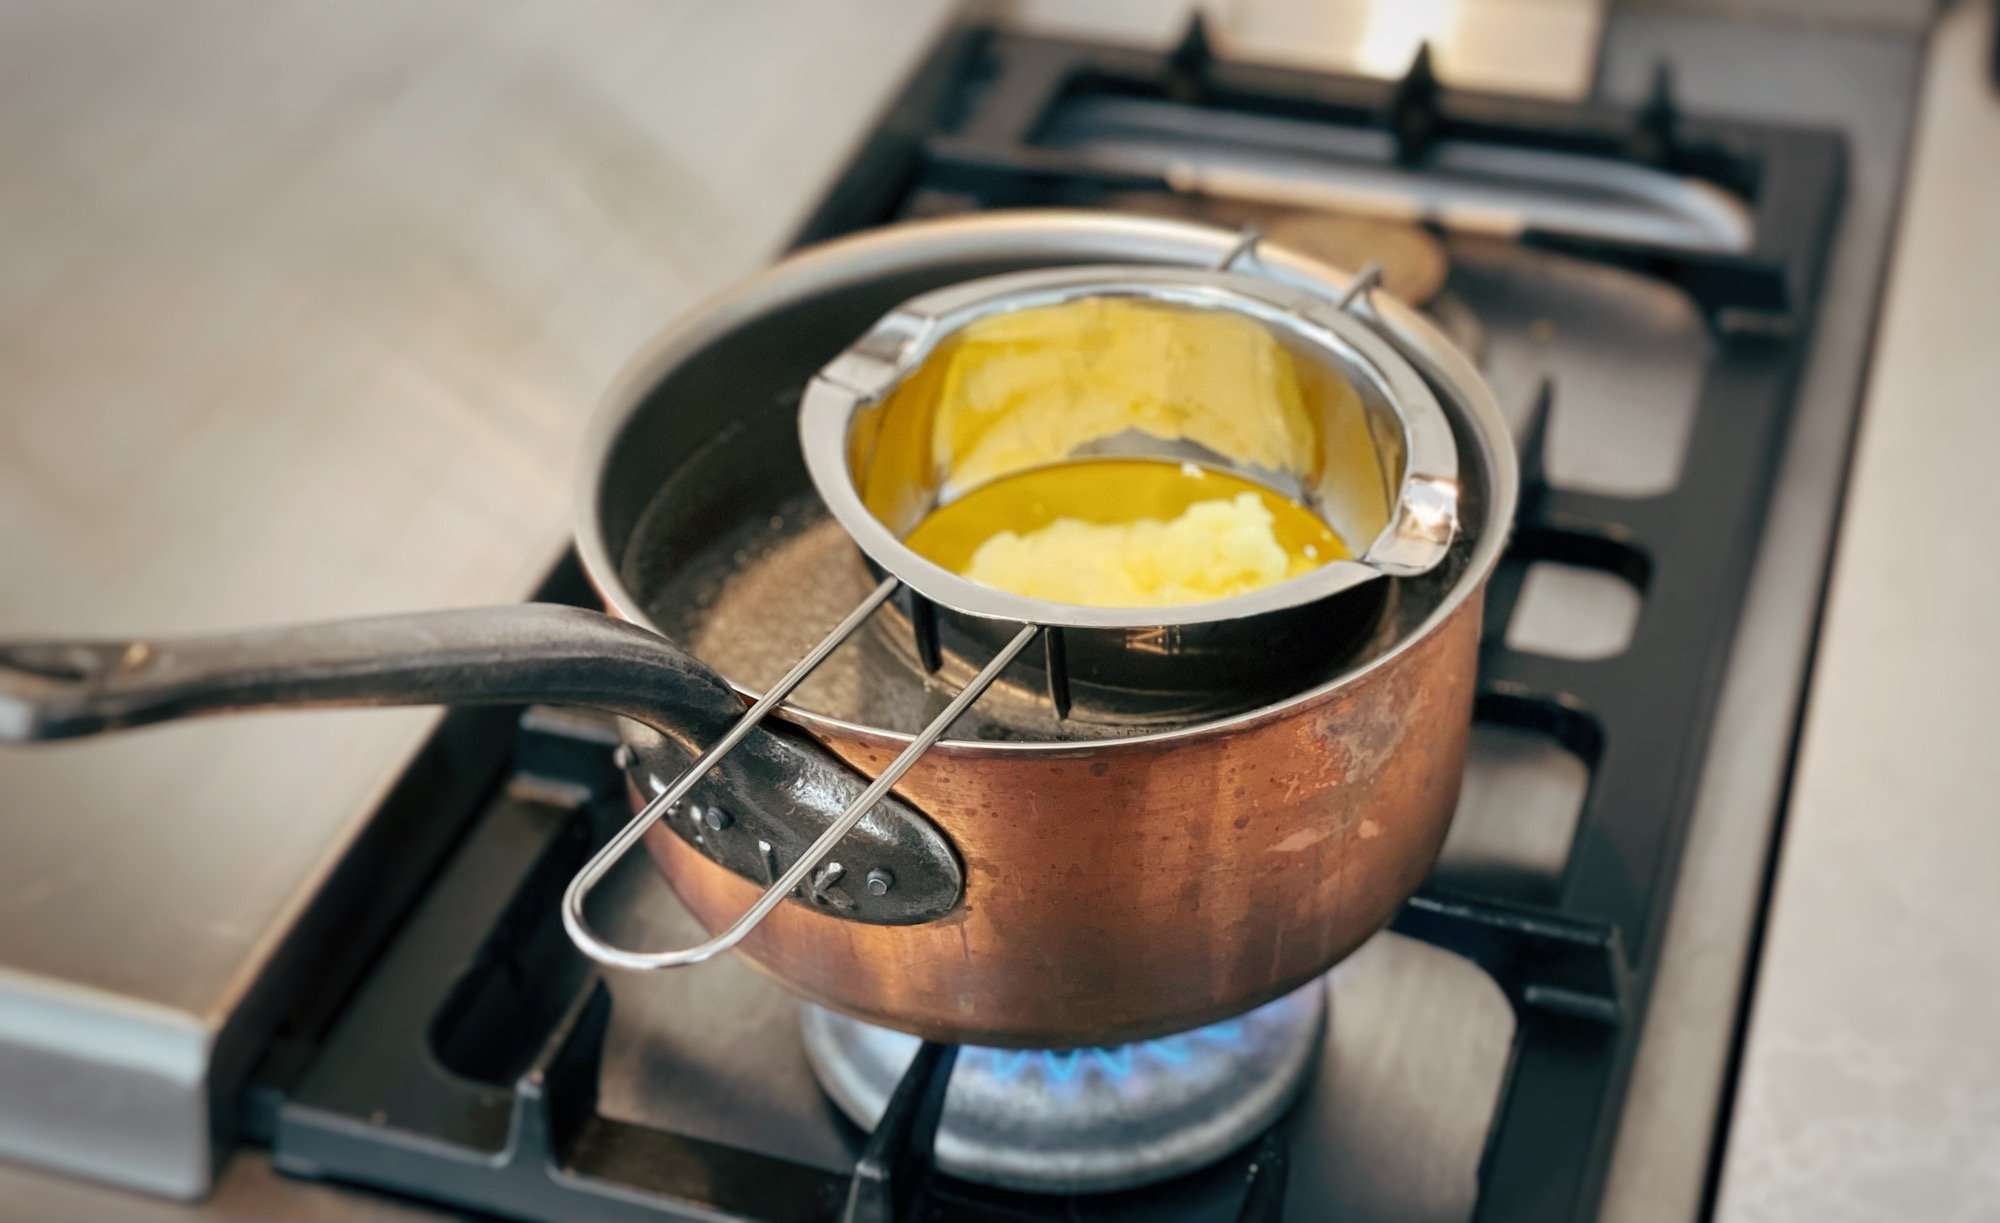 Melting tallow in a double boiler on a gas range.